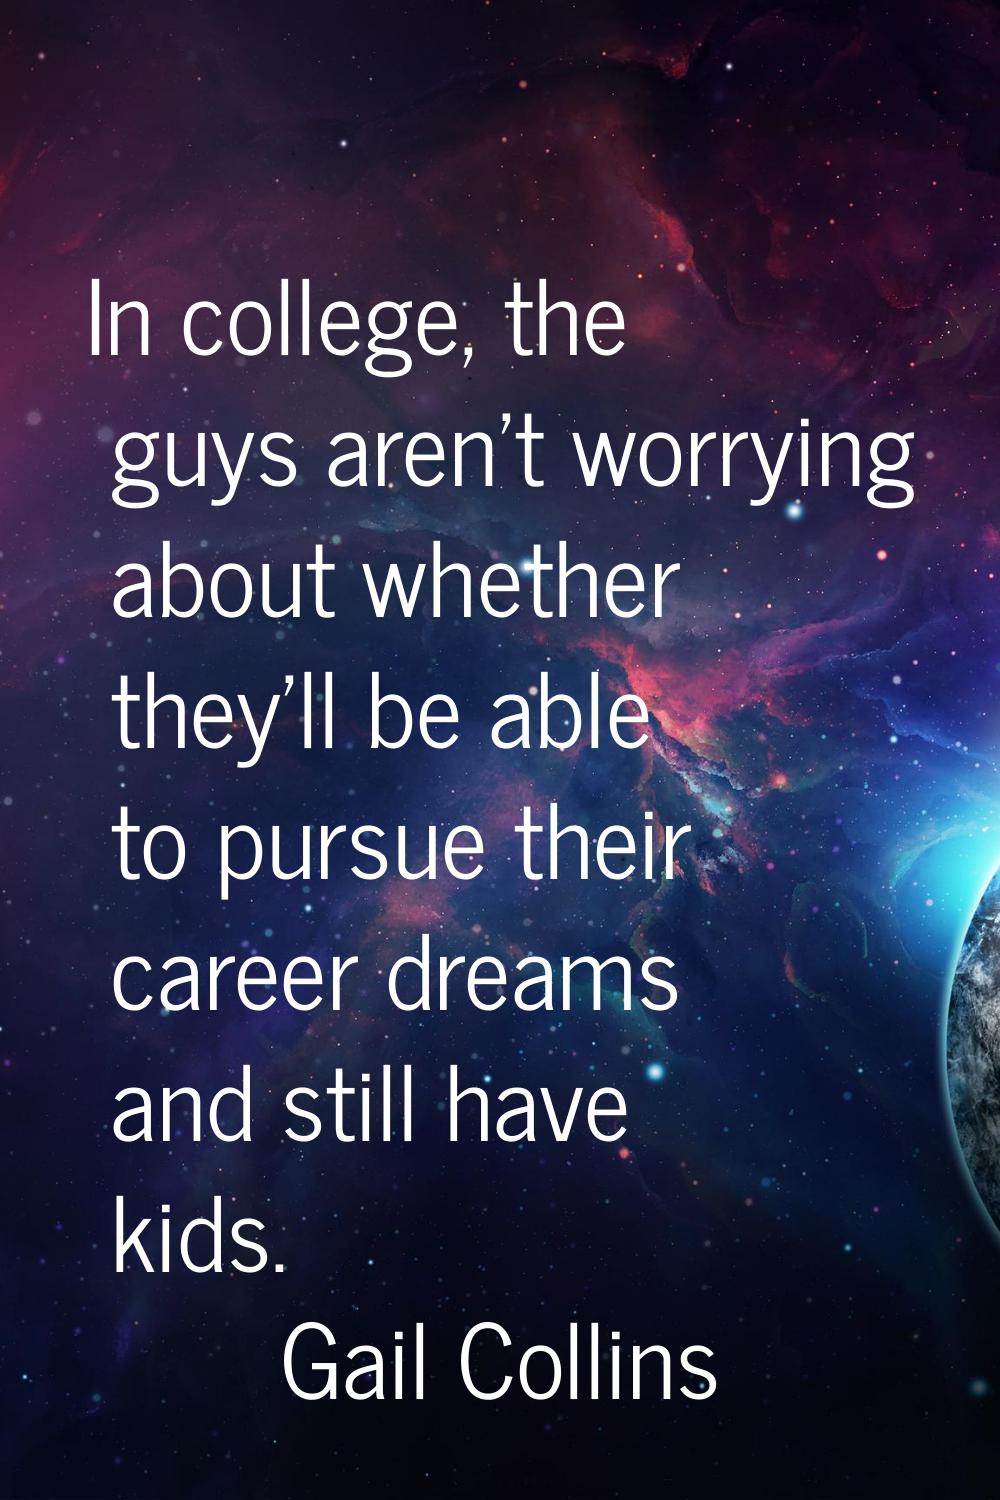 In college, the guys aren't worrying about whether they'll be able to pursue their career dreams an